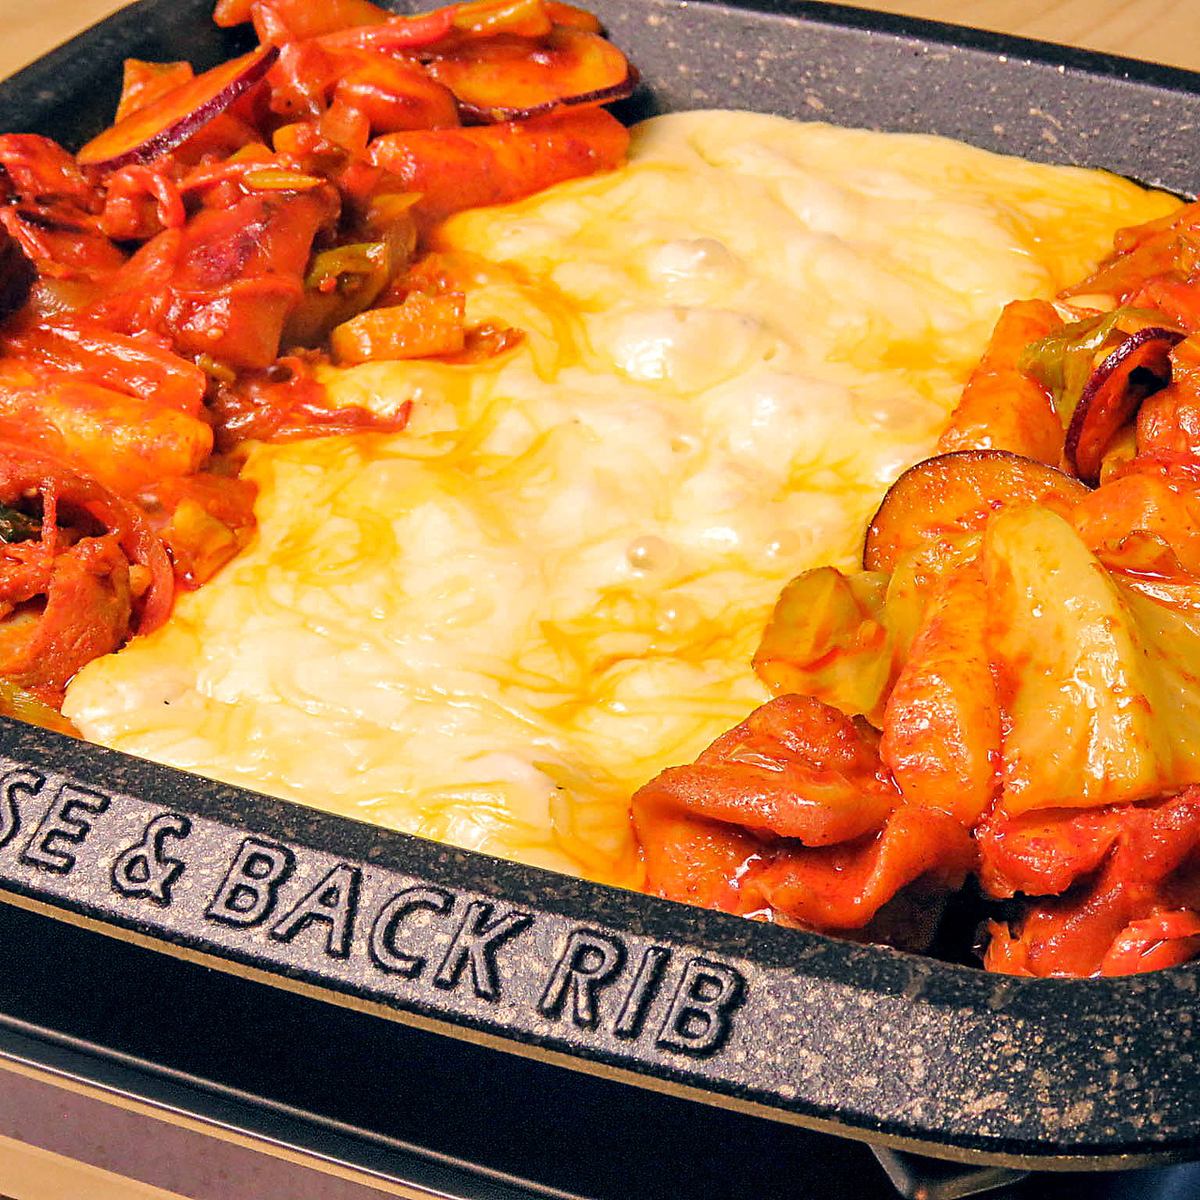 Very popular in Korea! Cheers with special cheese Dak-galbi!